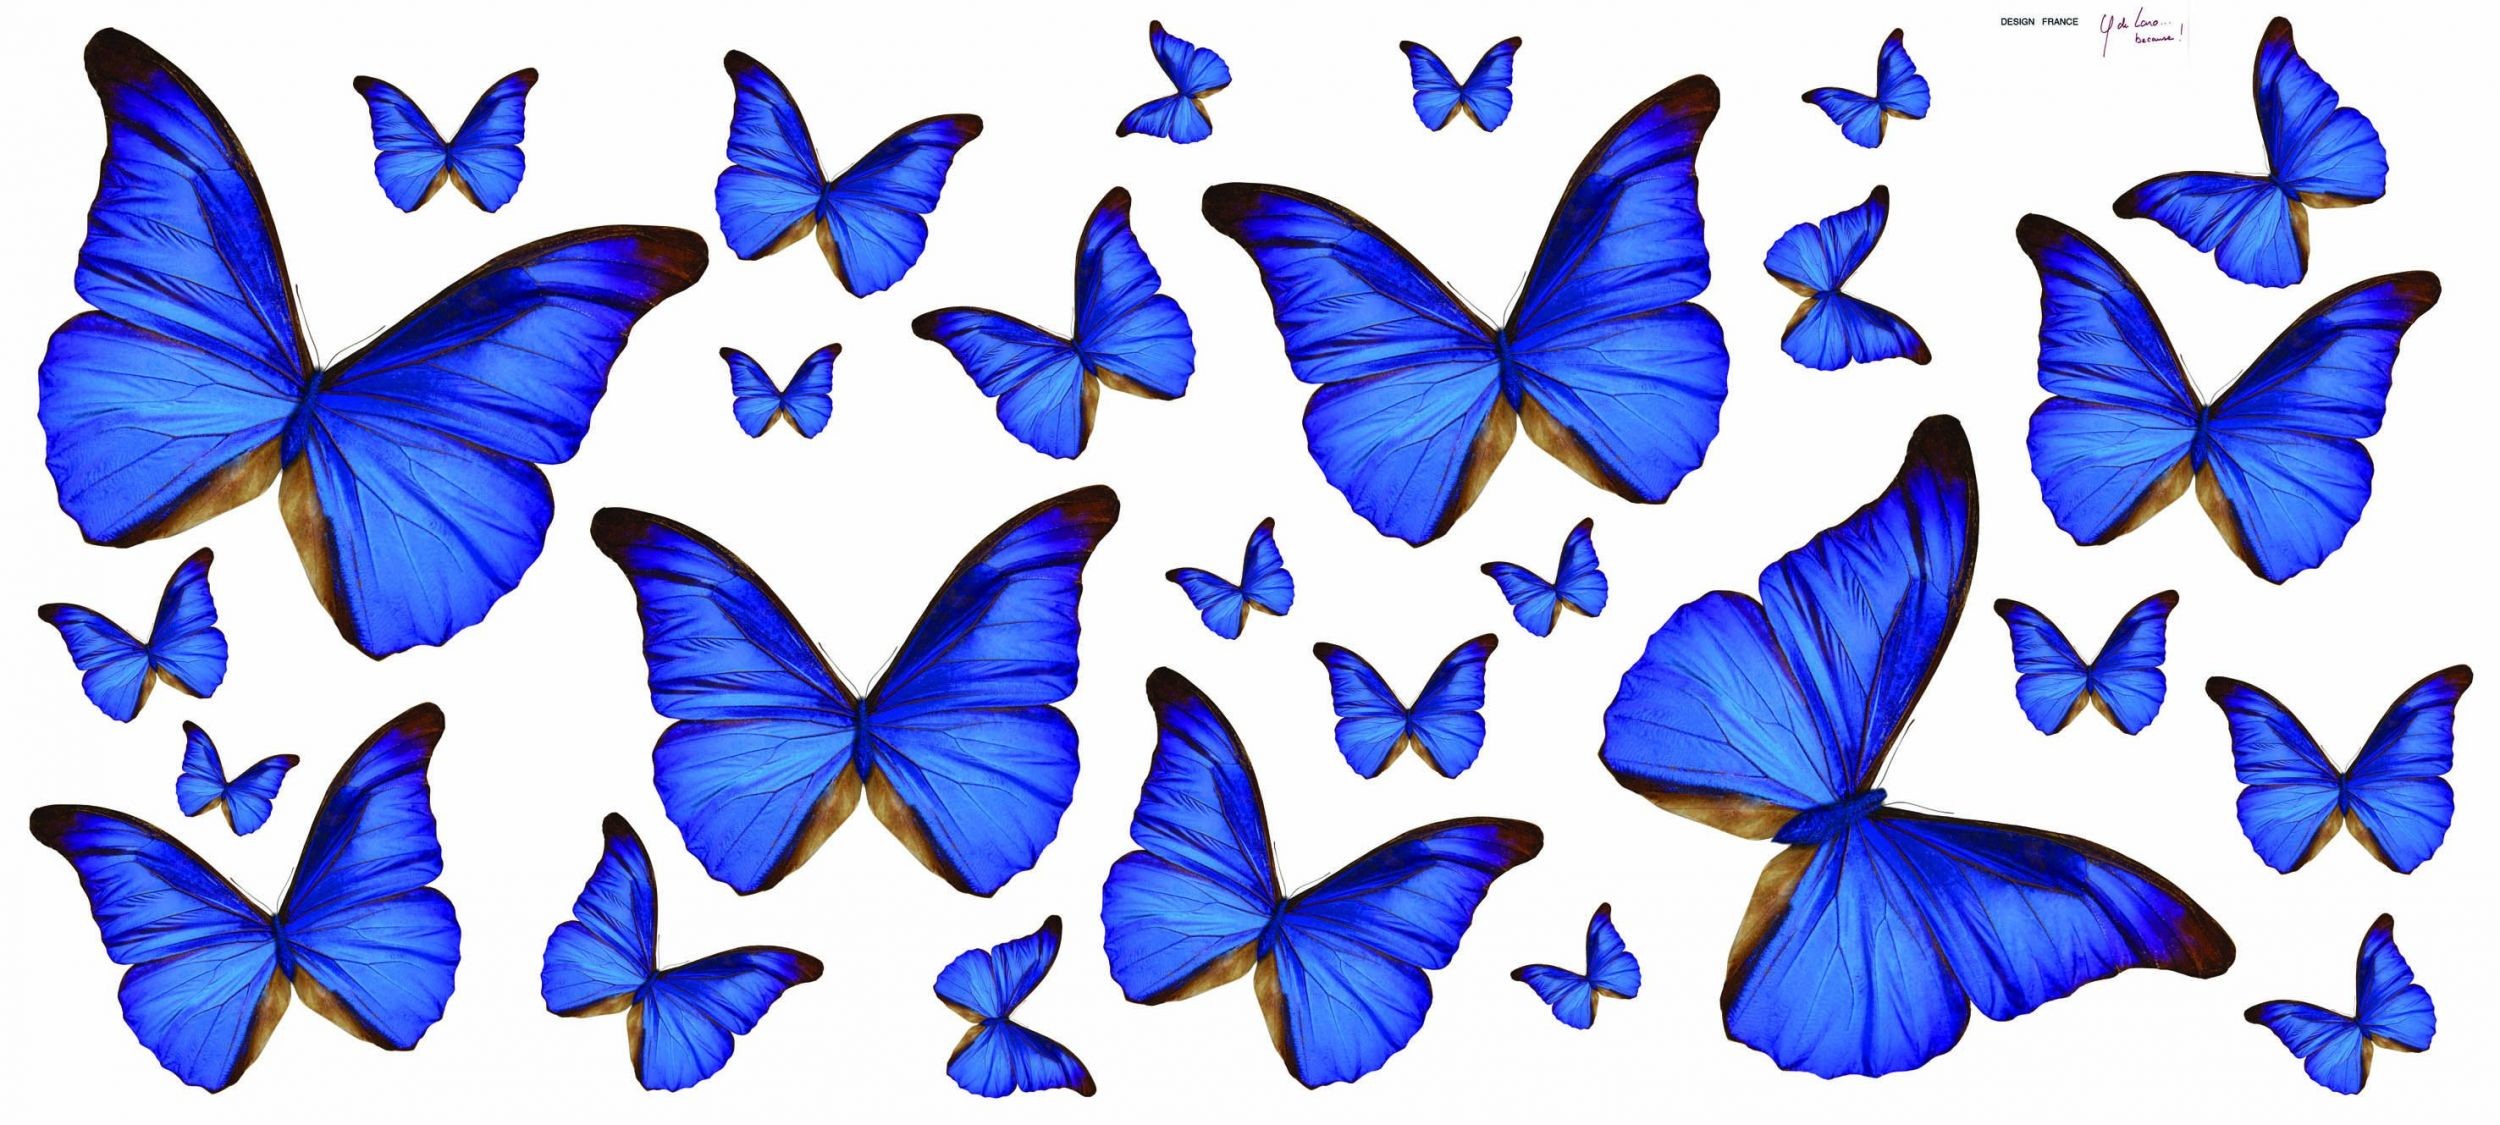 2500x1125 Adorable HDQ Backgrounds of Blue Butterfly, 2953x1329 px – download free